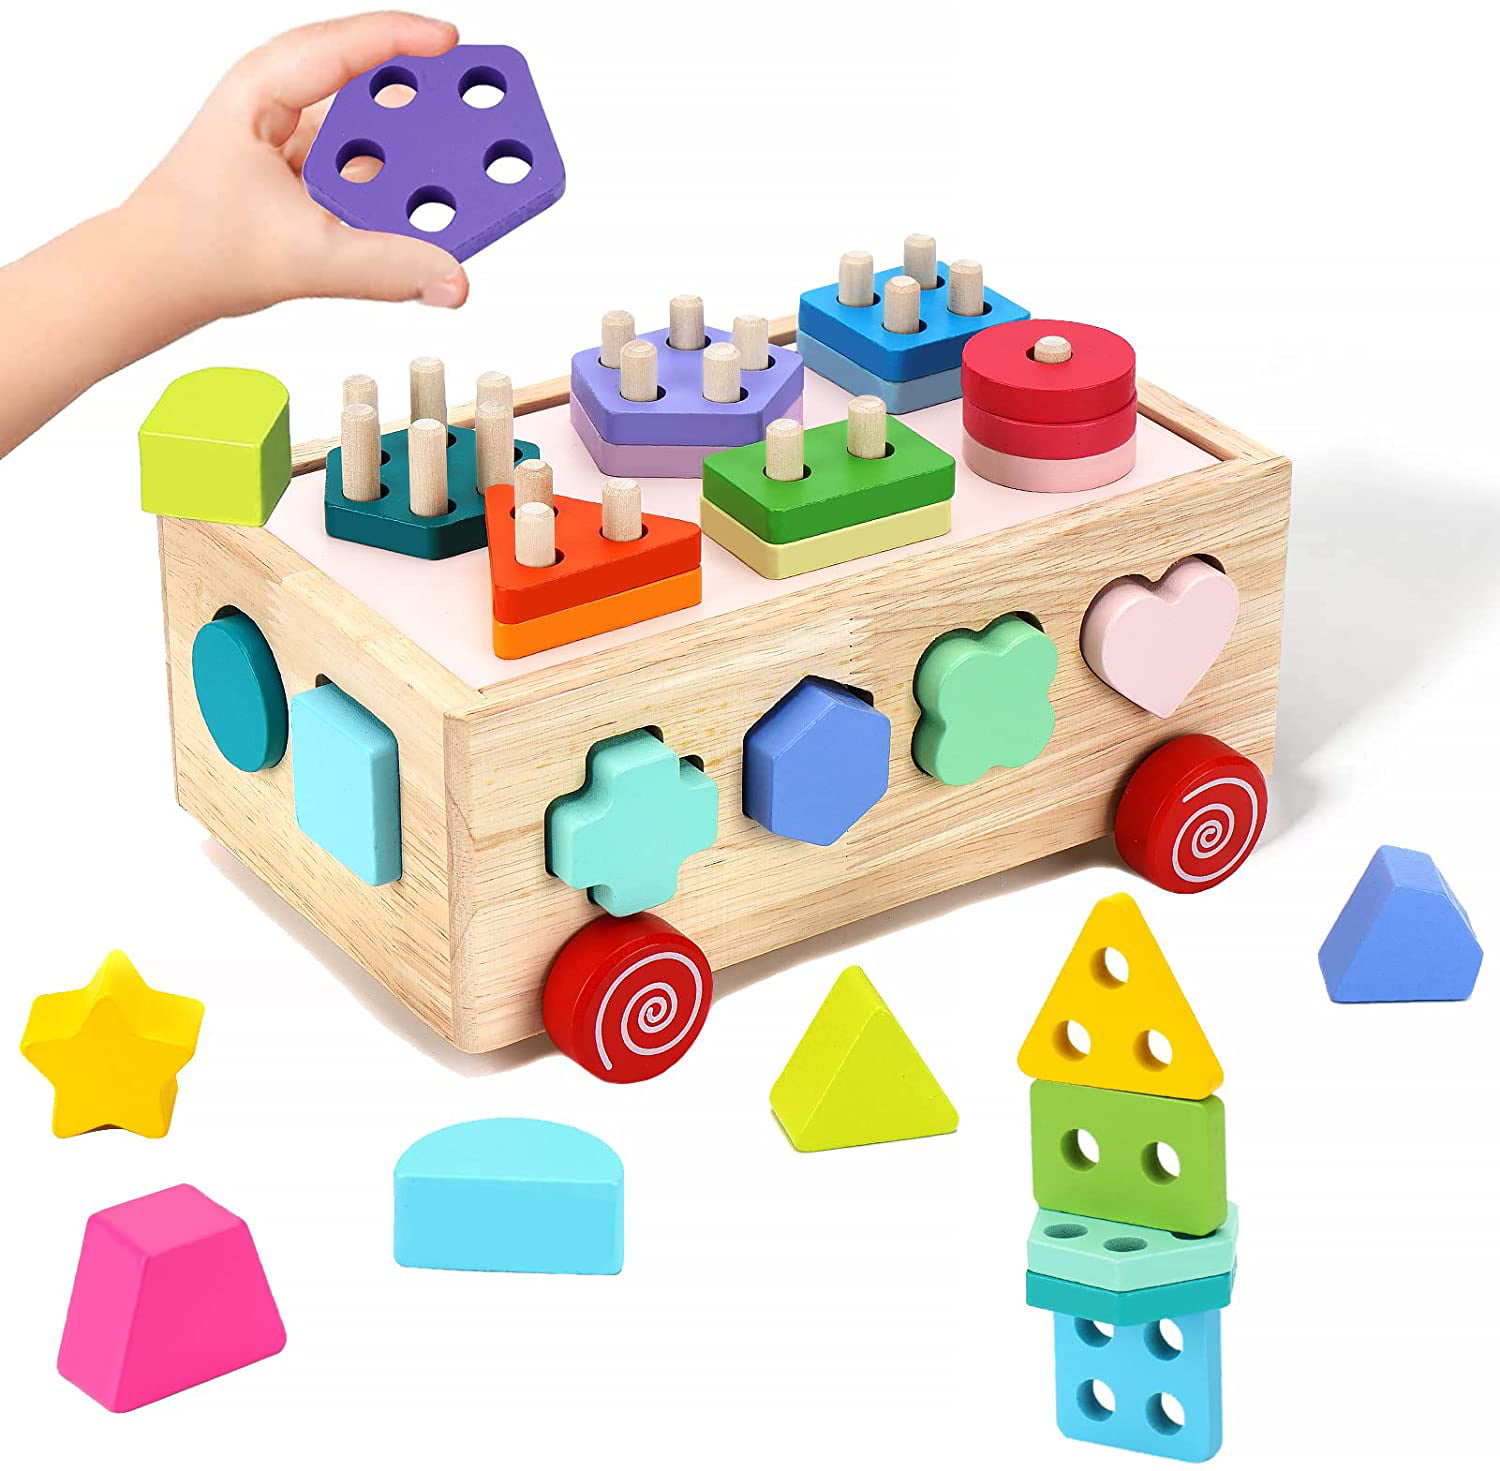 Wooden Montessori Shape Sorter Building Blocks Toy Baby Learning For Kids Hot 